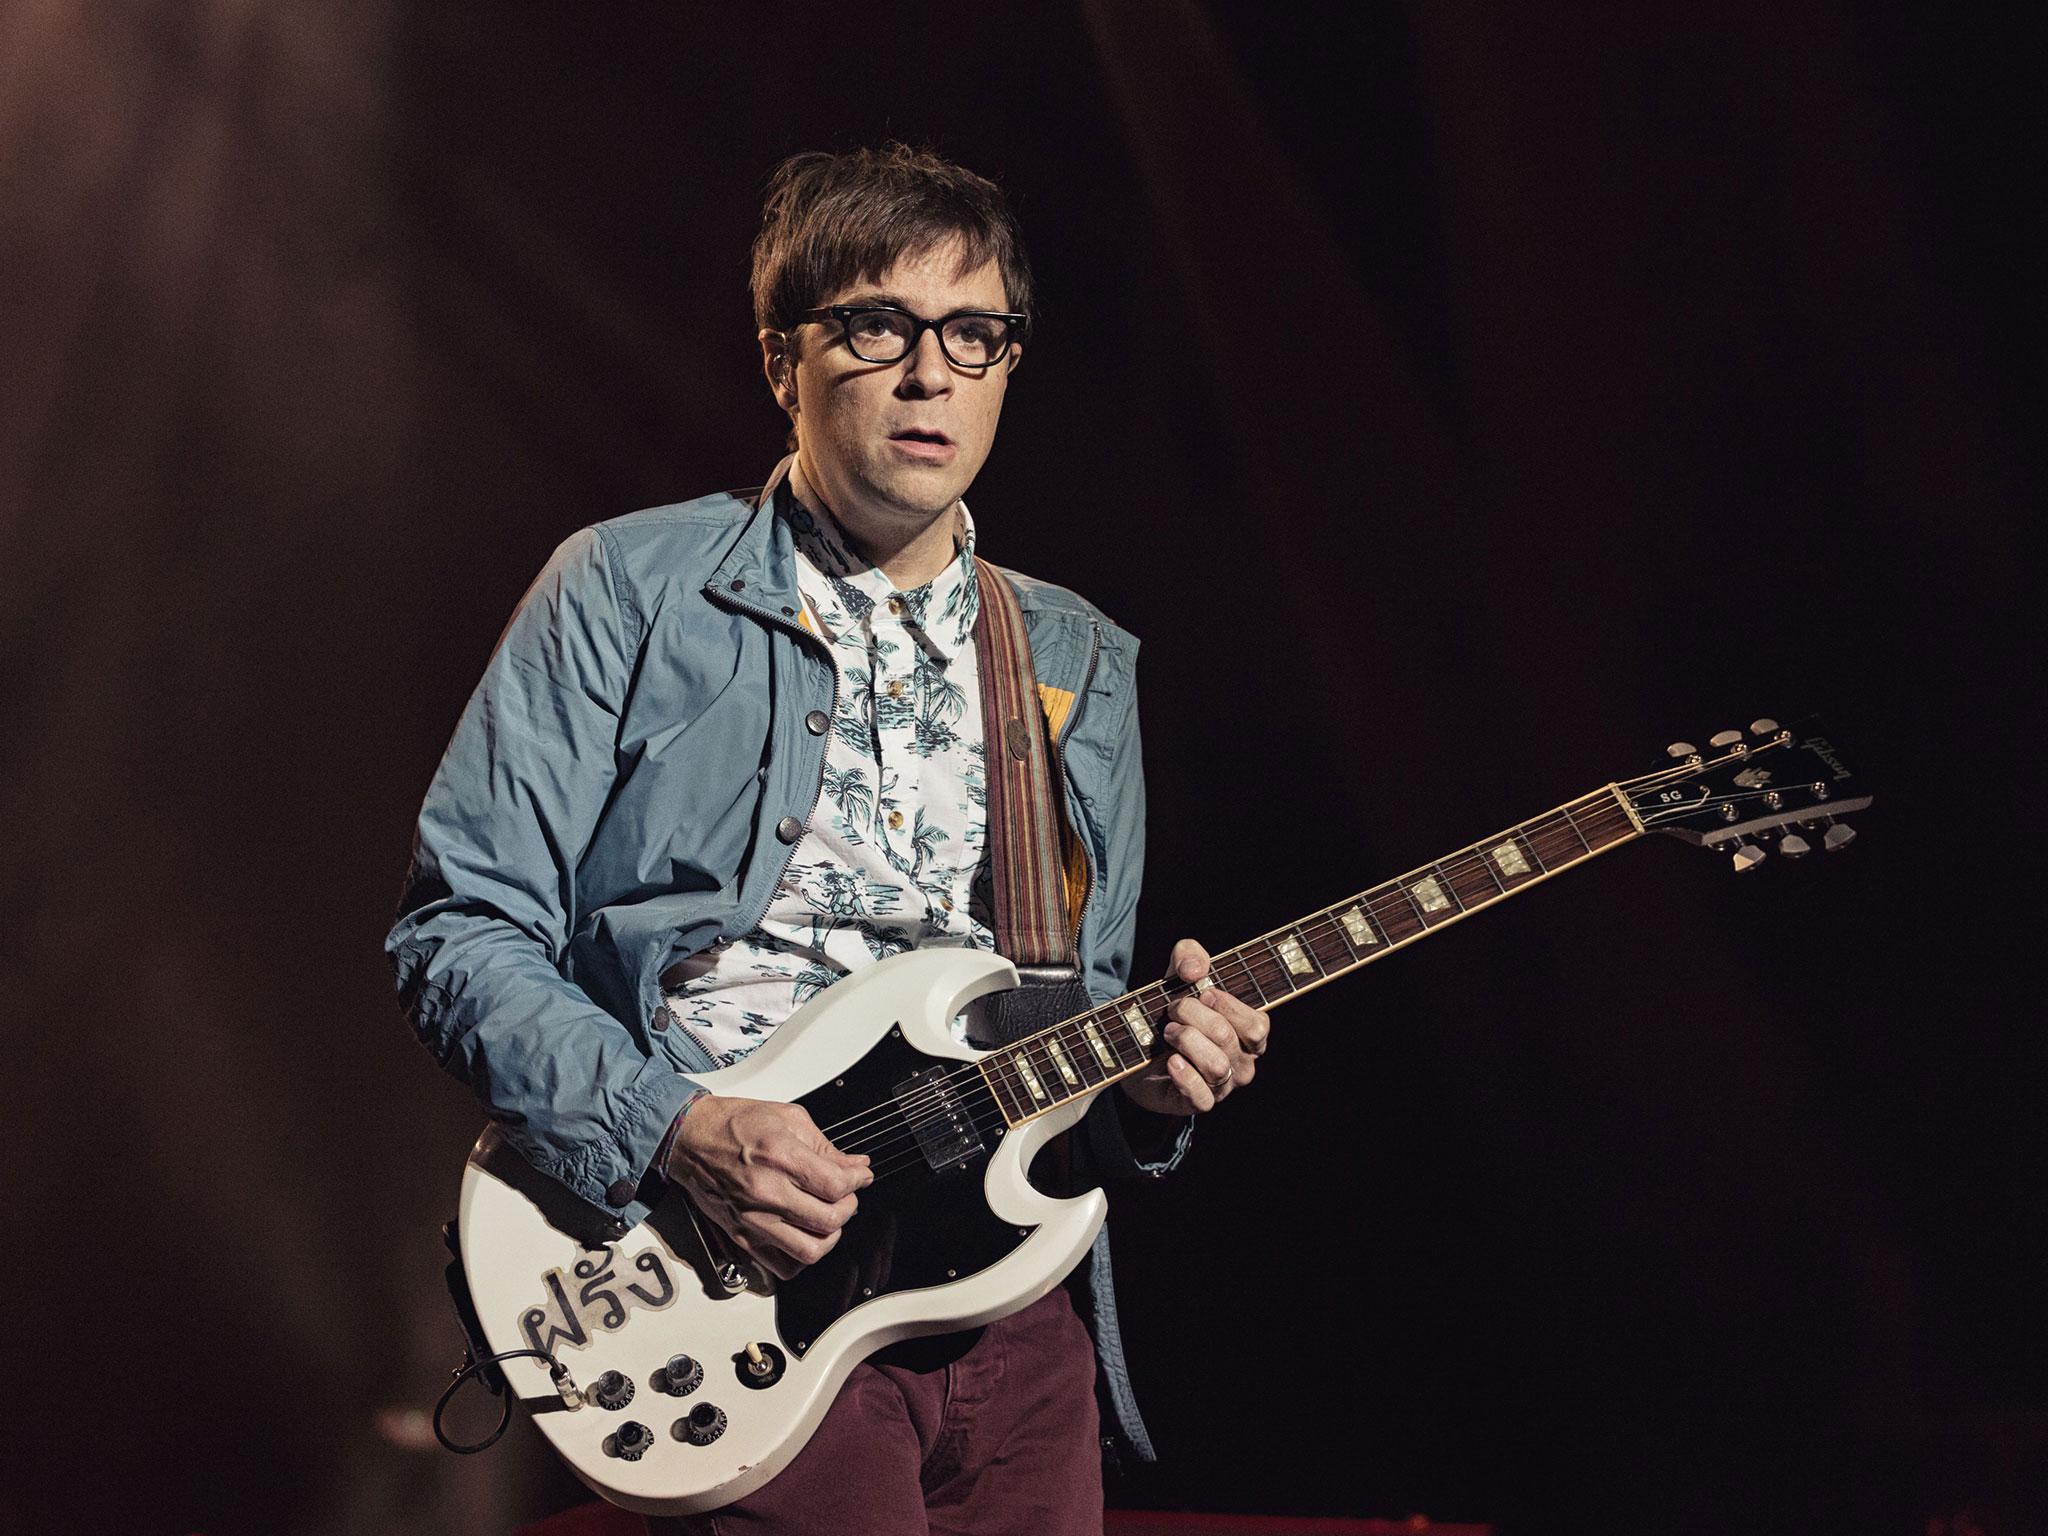 Rivers Cuomo from Weezer